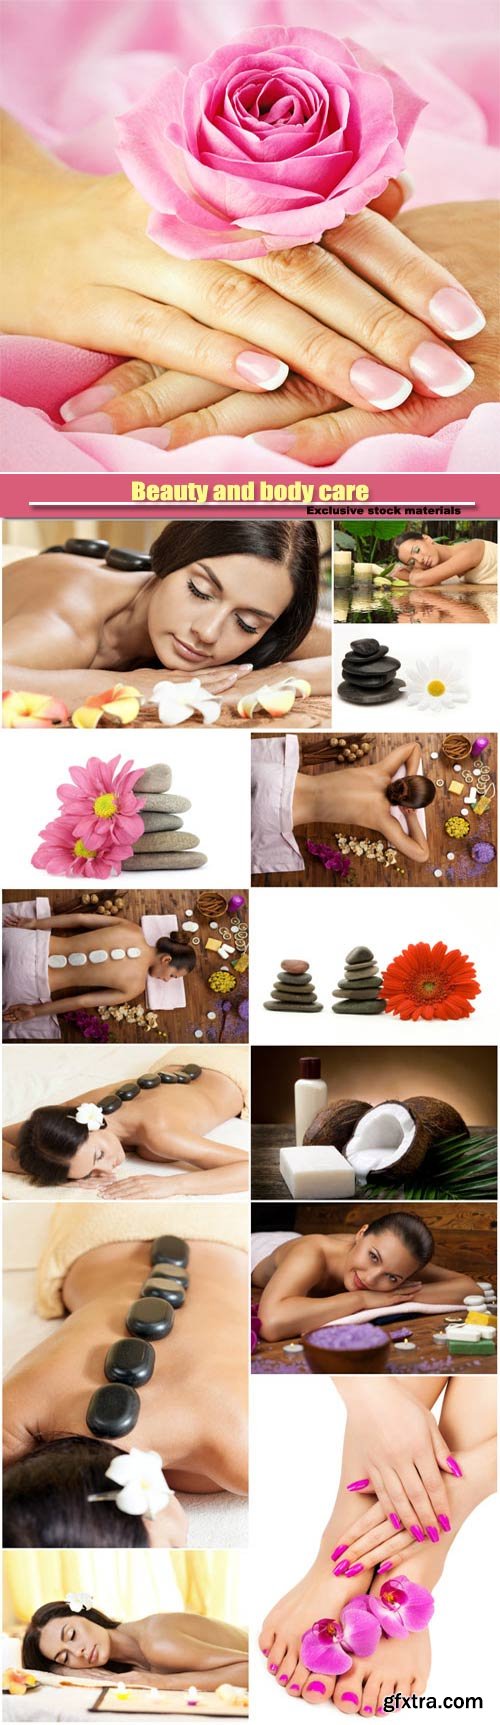 Beauty and body care, the girl in the spa salon